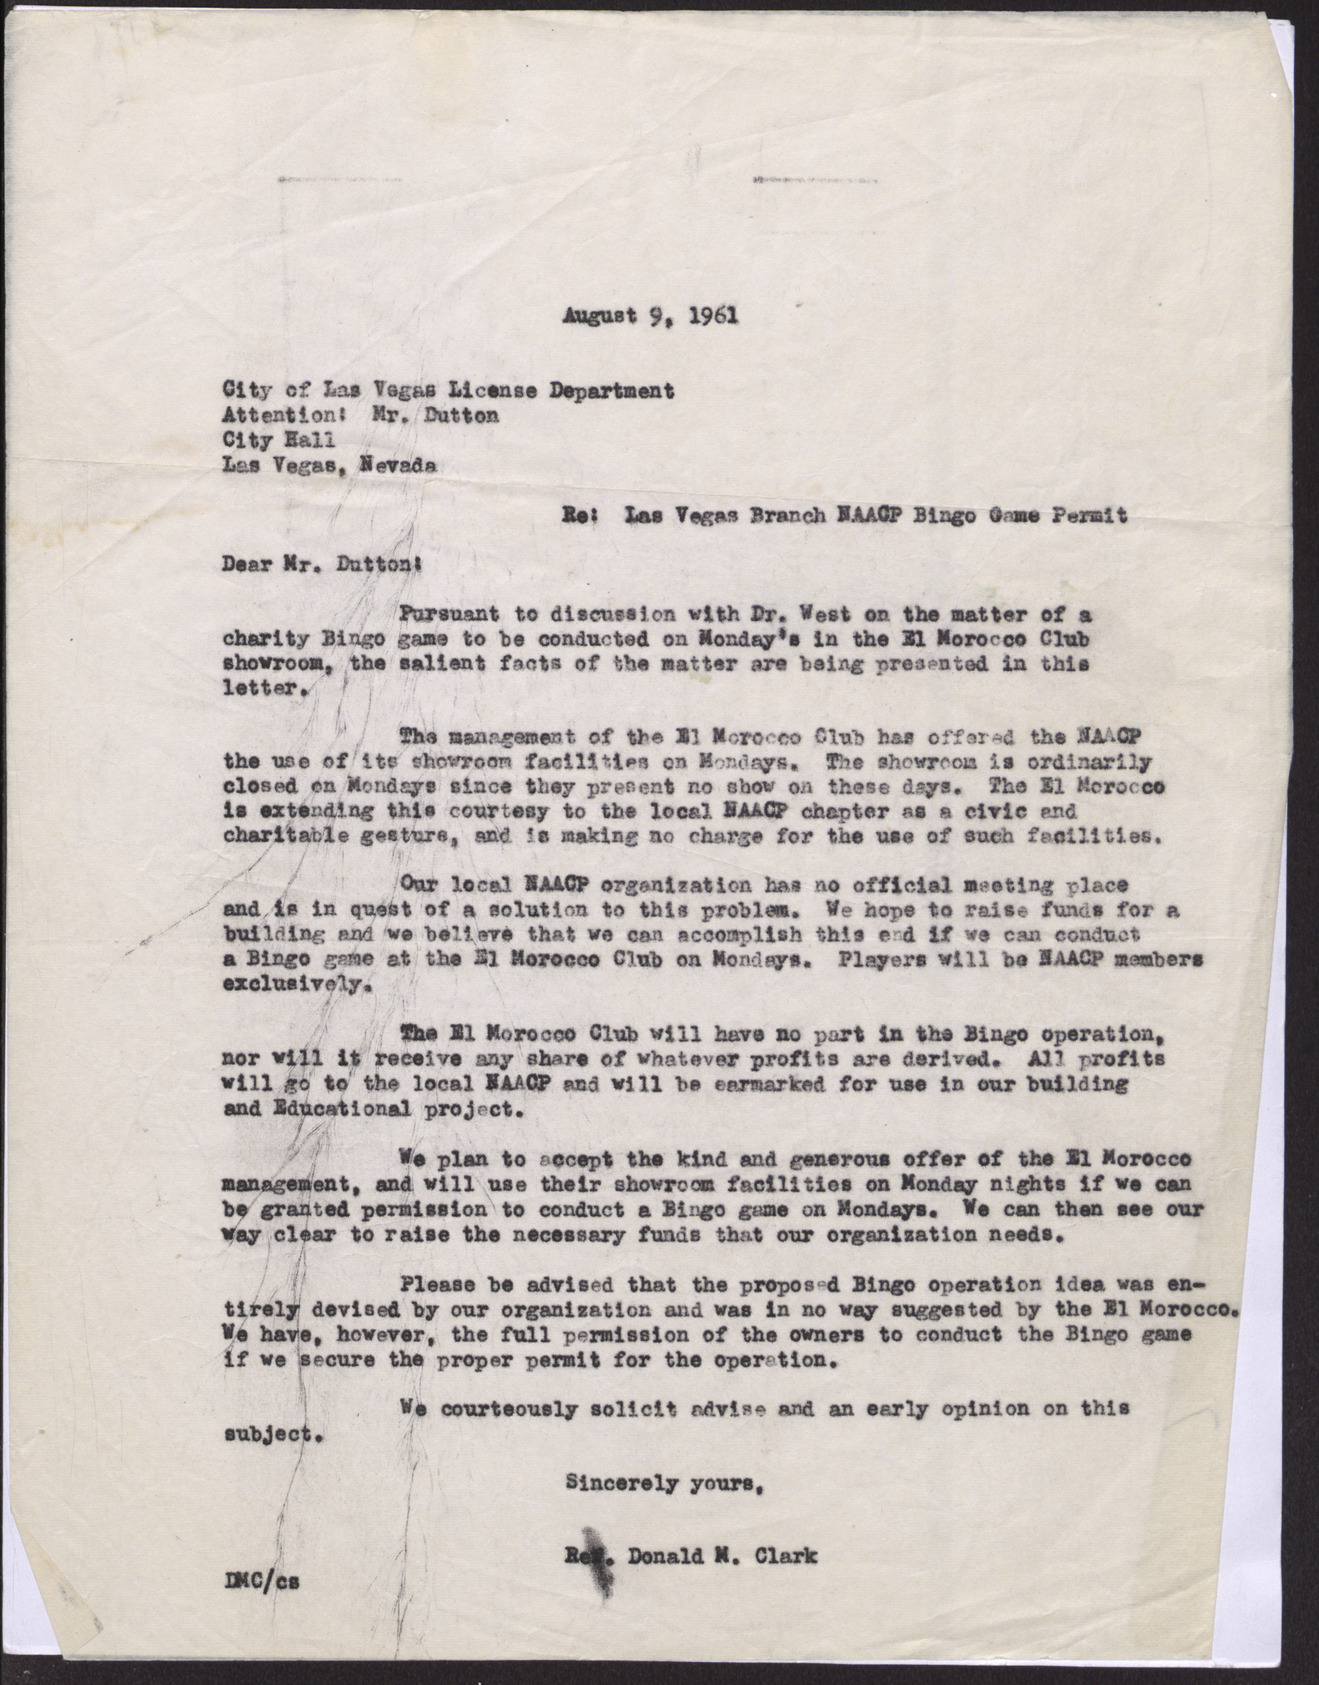 Letter to Mr. Dutton from Rev. Donald M. Clark, August 9, 1961